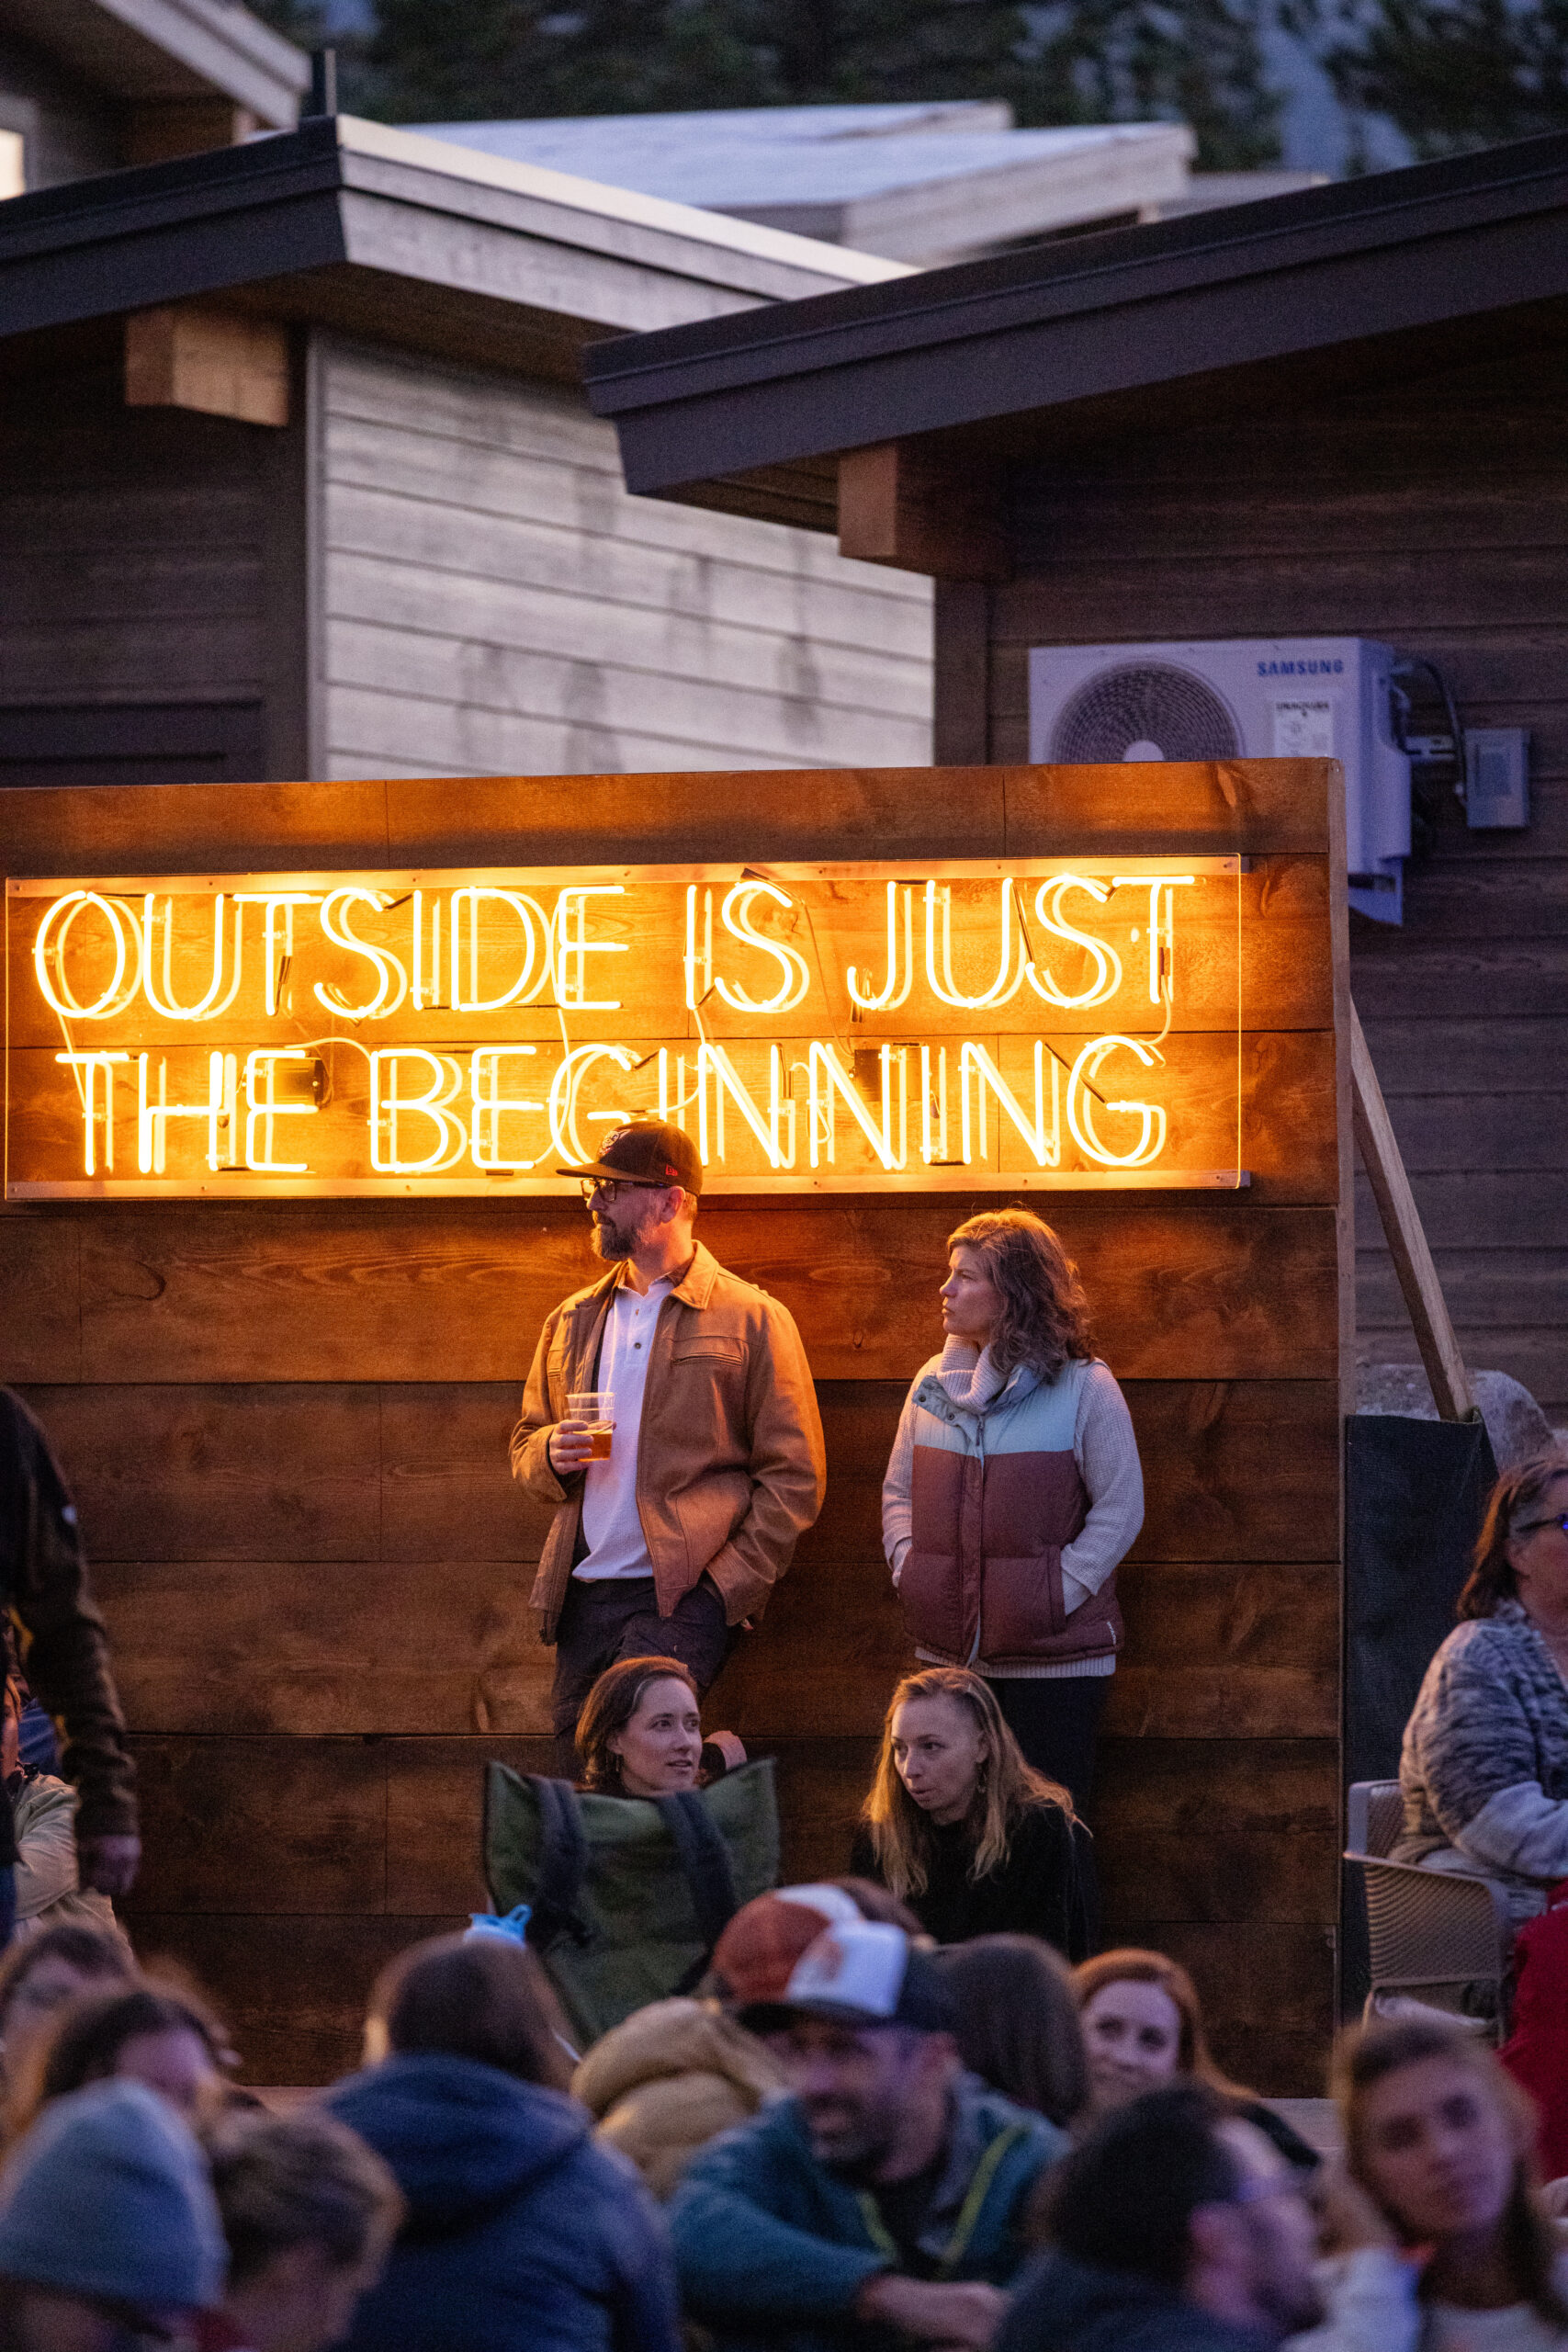 A couple stands apart from the crowd under a signboard that reads "Outside is just the beginning."